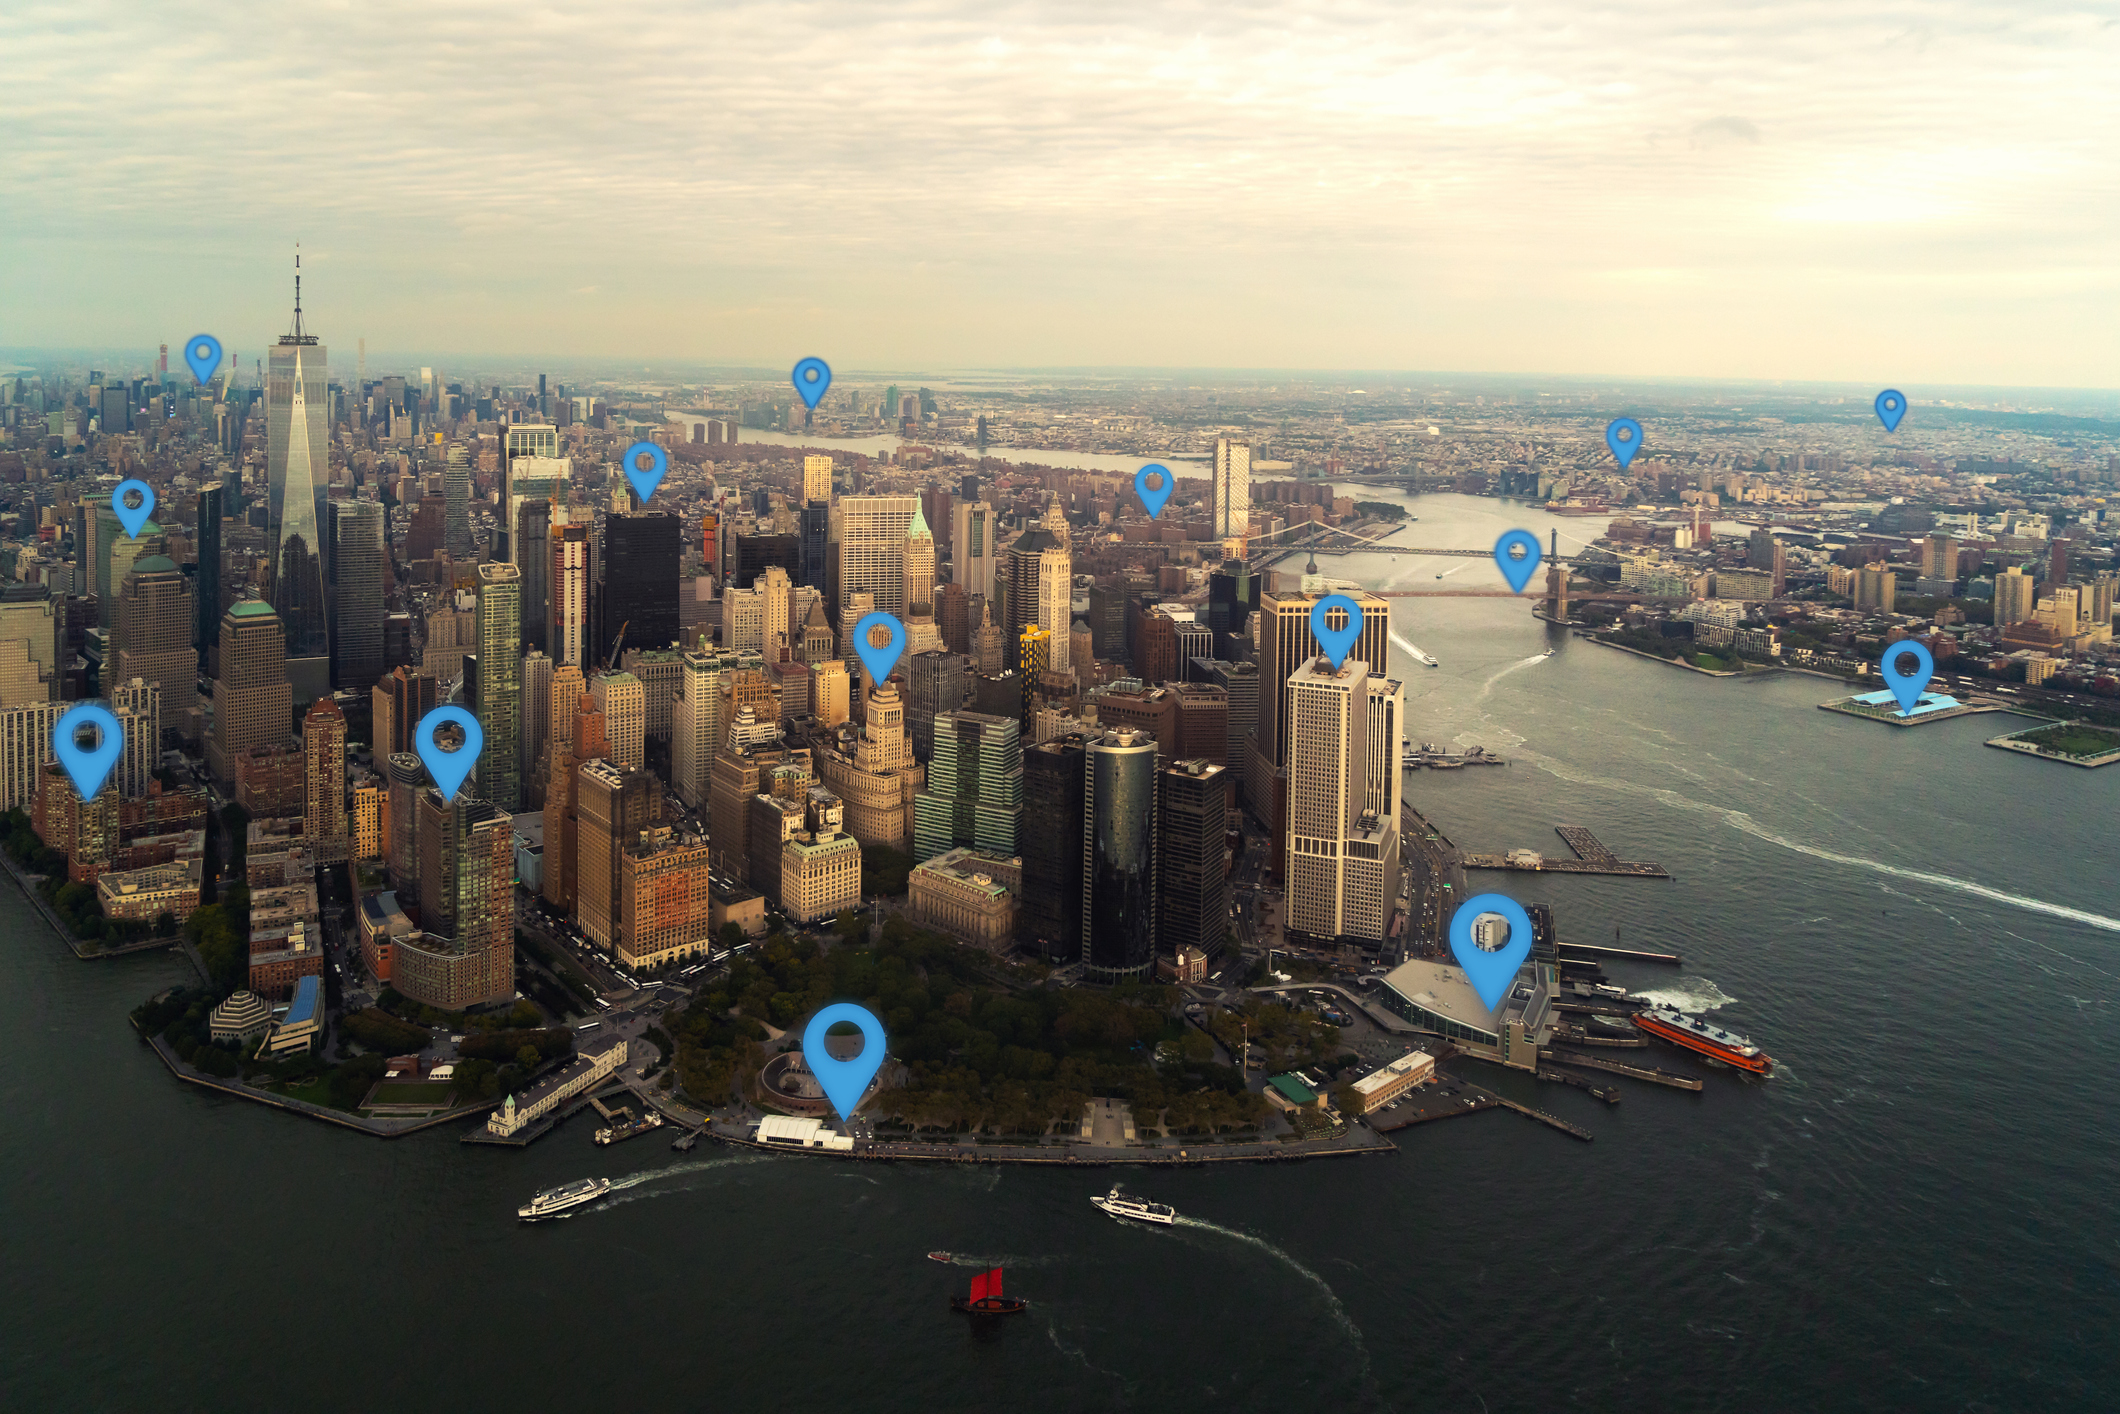 View of NYC with blue location pins overlaid on certain spots